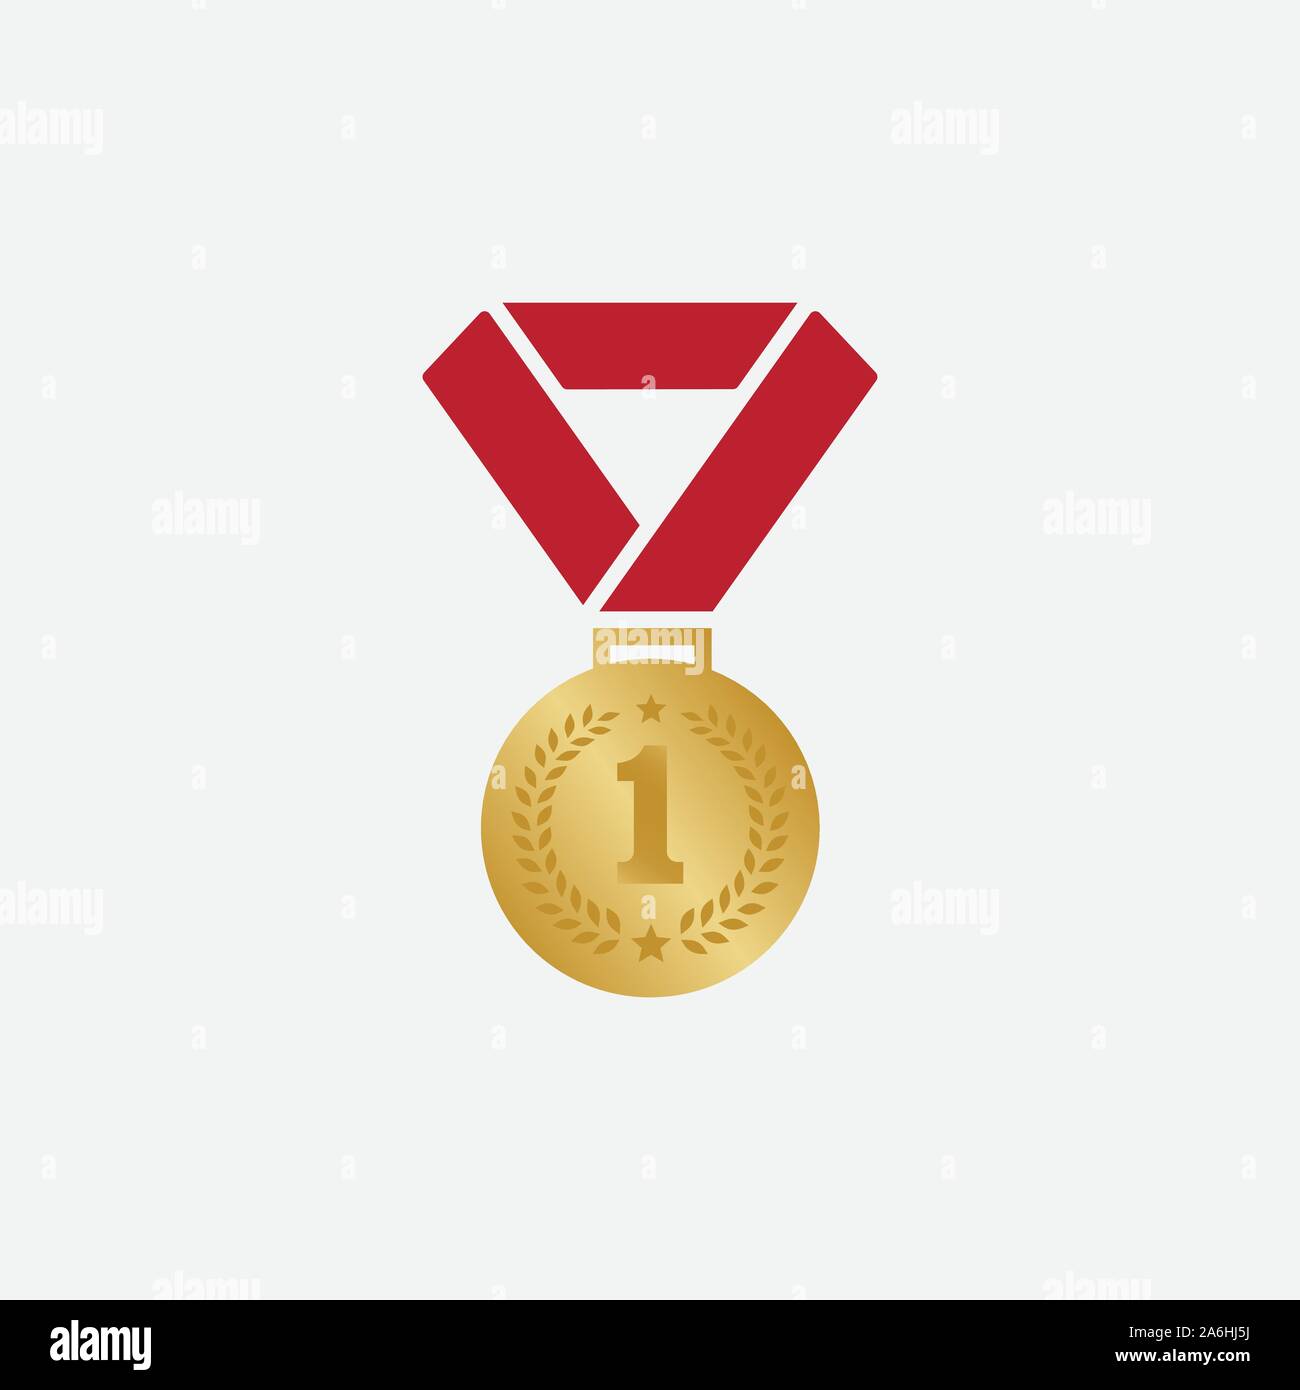 Gold medal logo Template vector illustration icon design, medal with red ribbon for first place icon, medal flat icon illustration, champions medal icon illustration, award logo Stock Vector